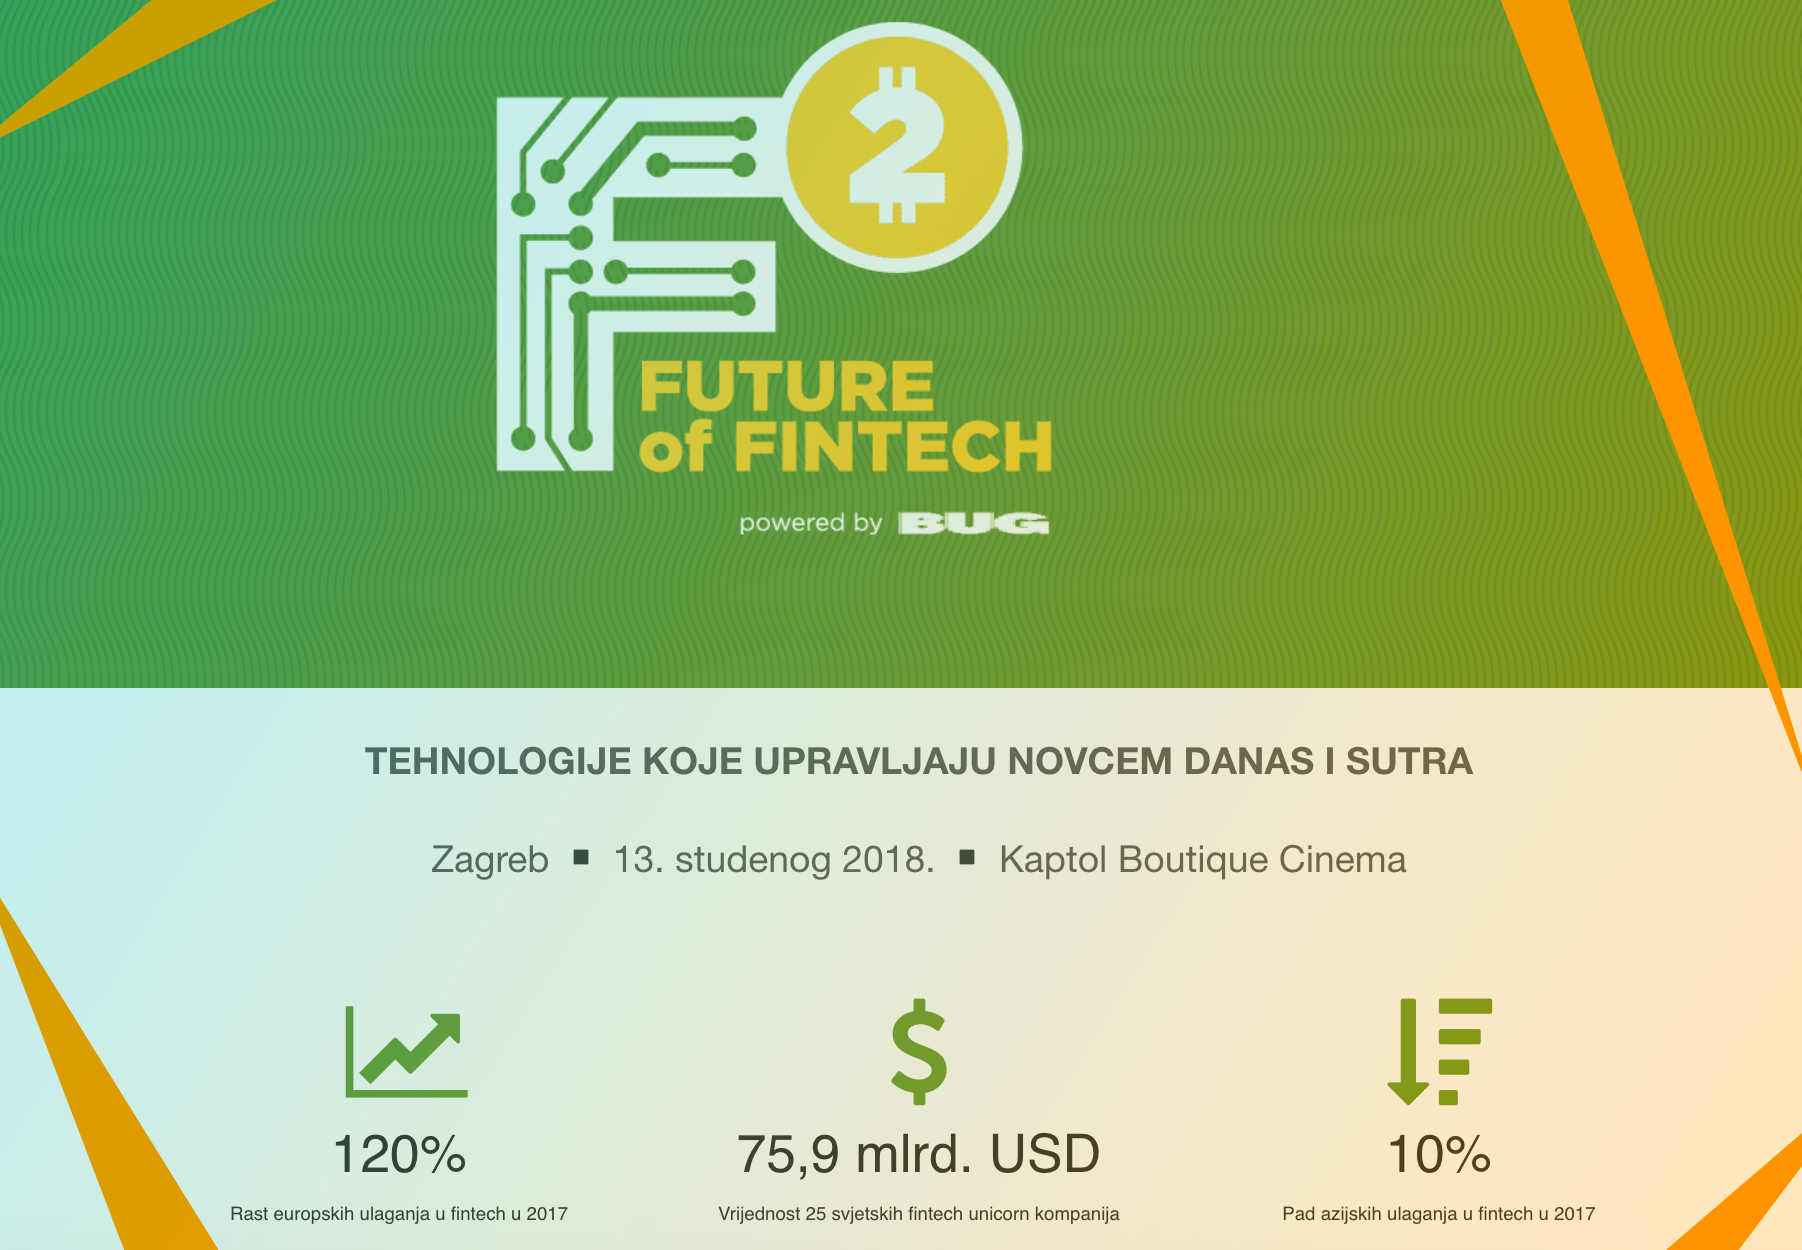 Future of Fintech Konferencija 2018. Powered by BUG